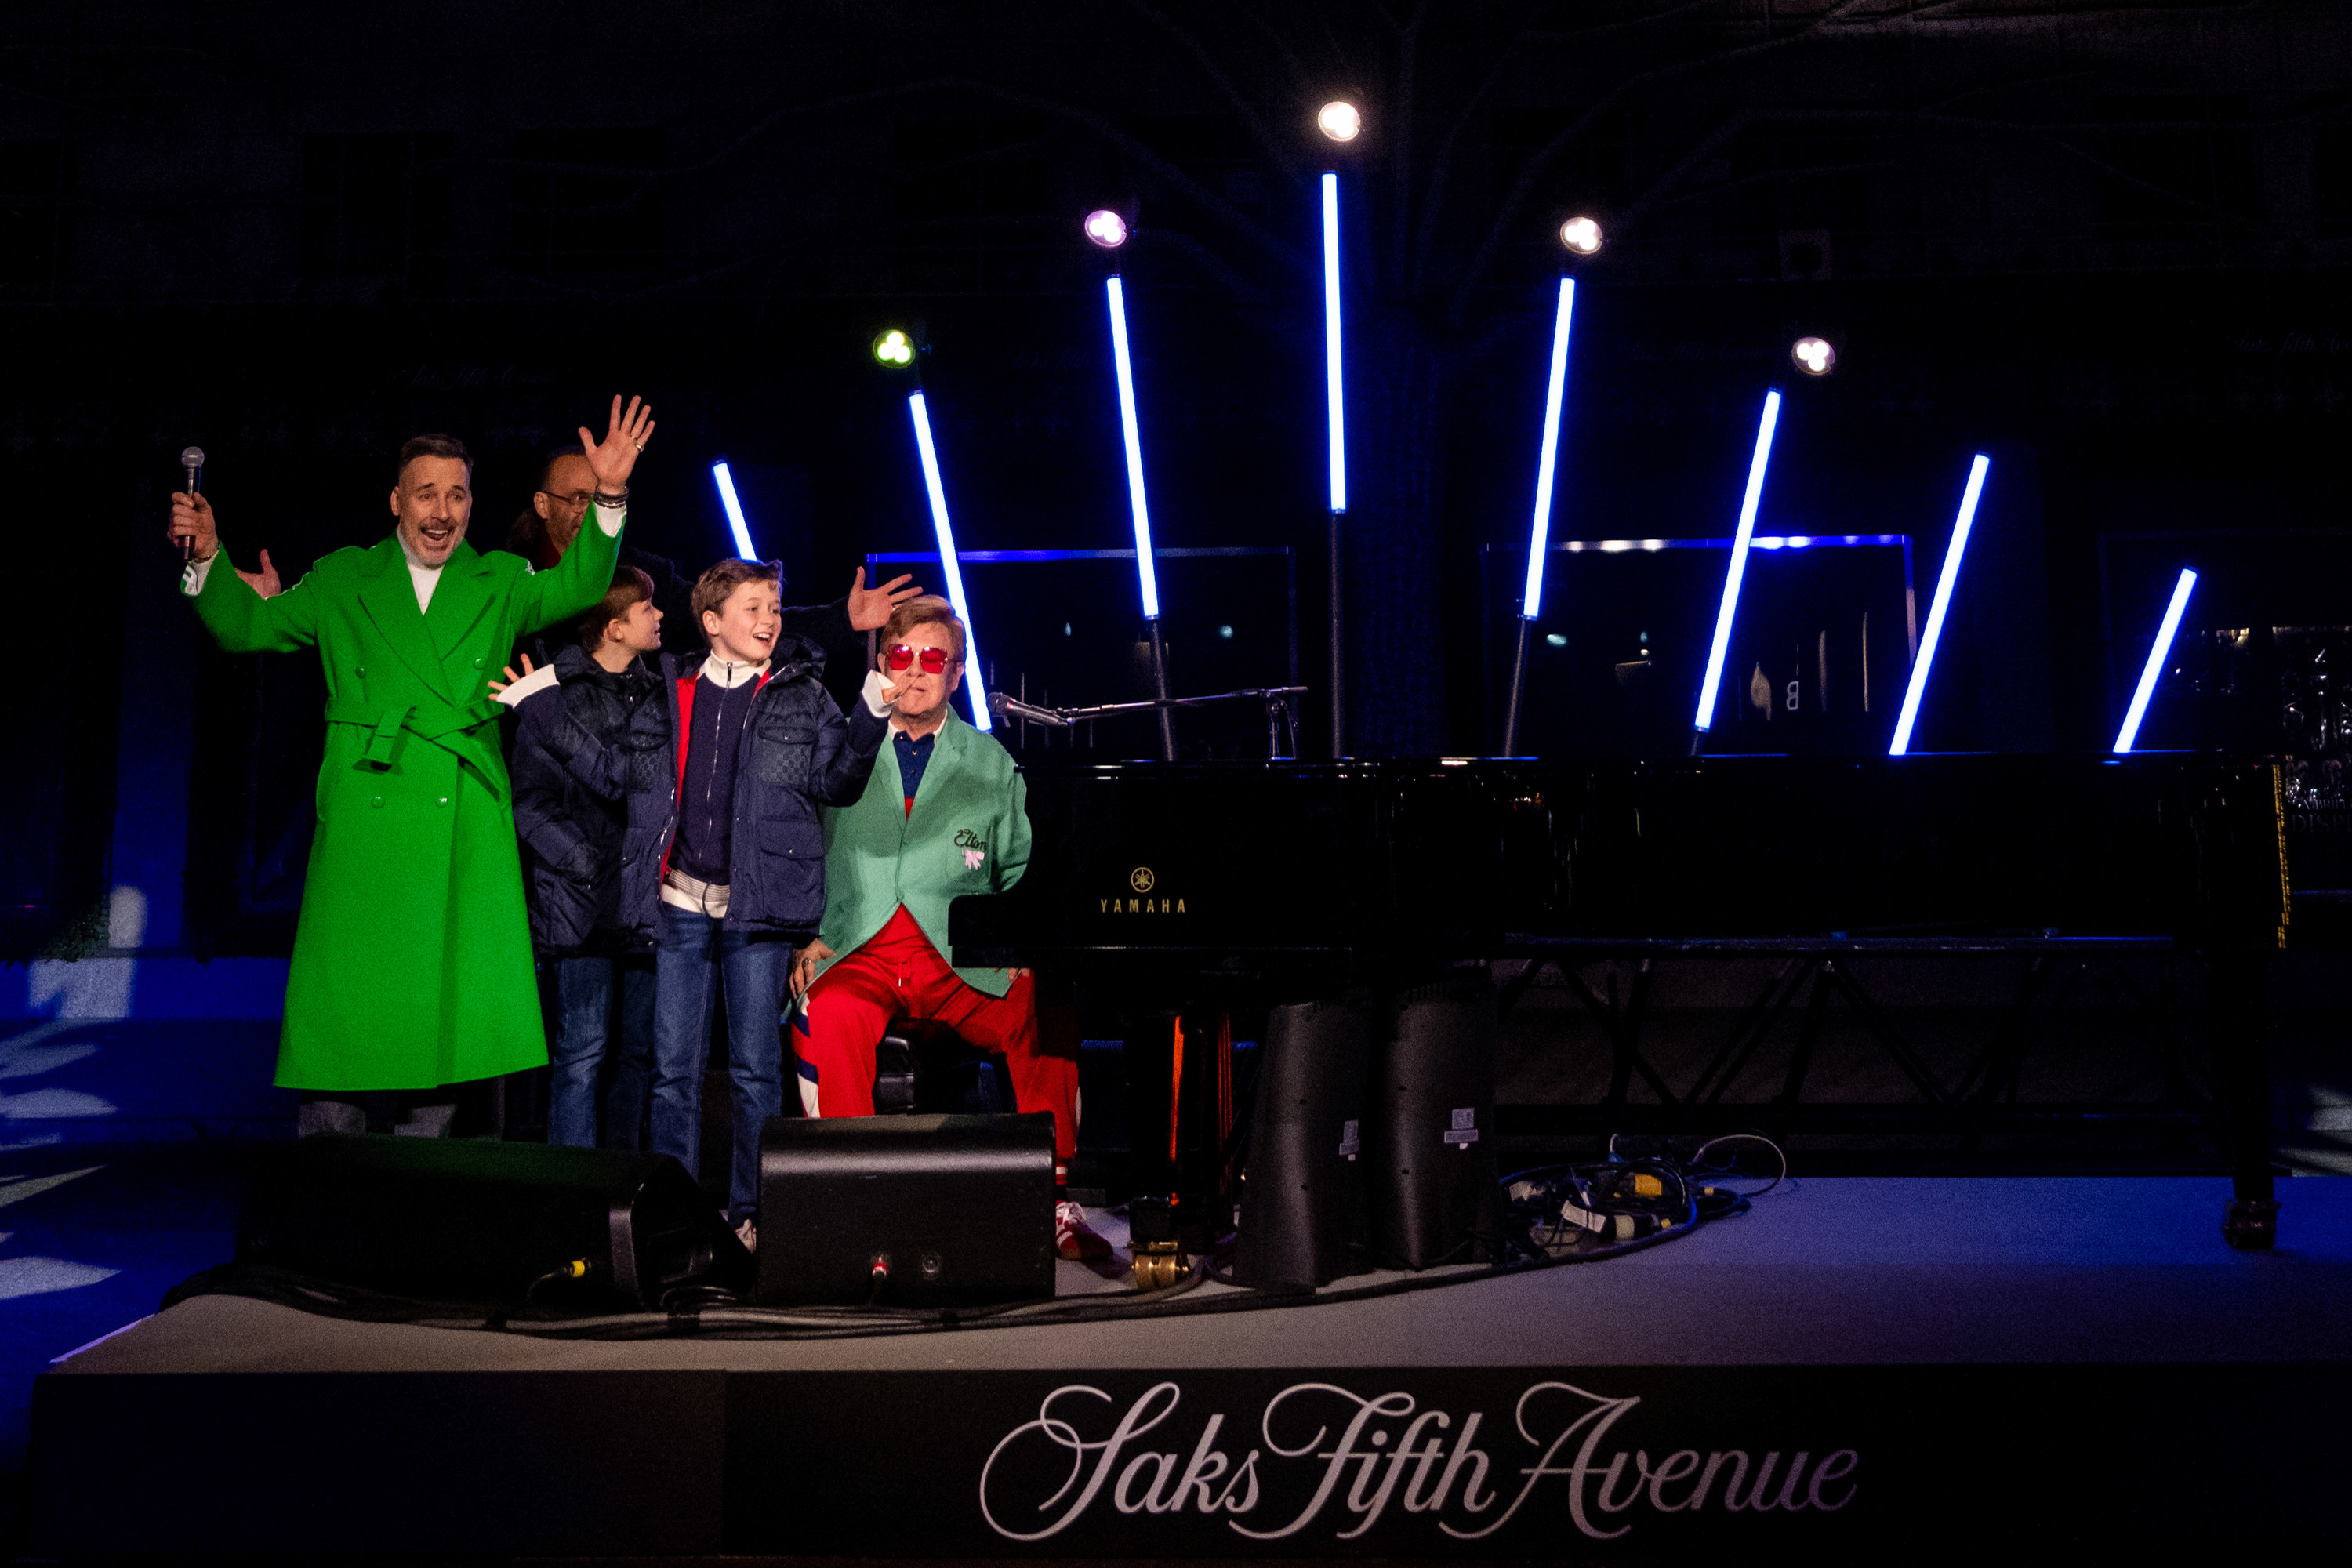 Marc J. Metrick, CEO of Saks Fifth Avenue, along with David Furnish, Elton John, and their sons — Zachary Jackson Levon and Elijah Joseph Daniel — onstage during the opening ceremony for Saks Fifth Avenue&#x27;s Holiday Windows and Light show in 2022